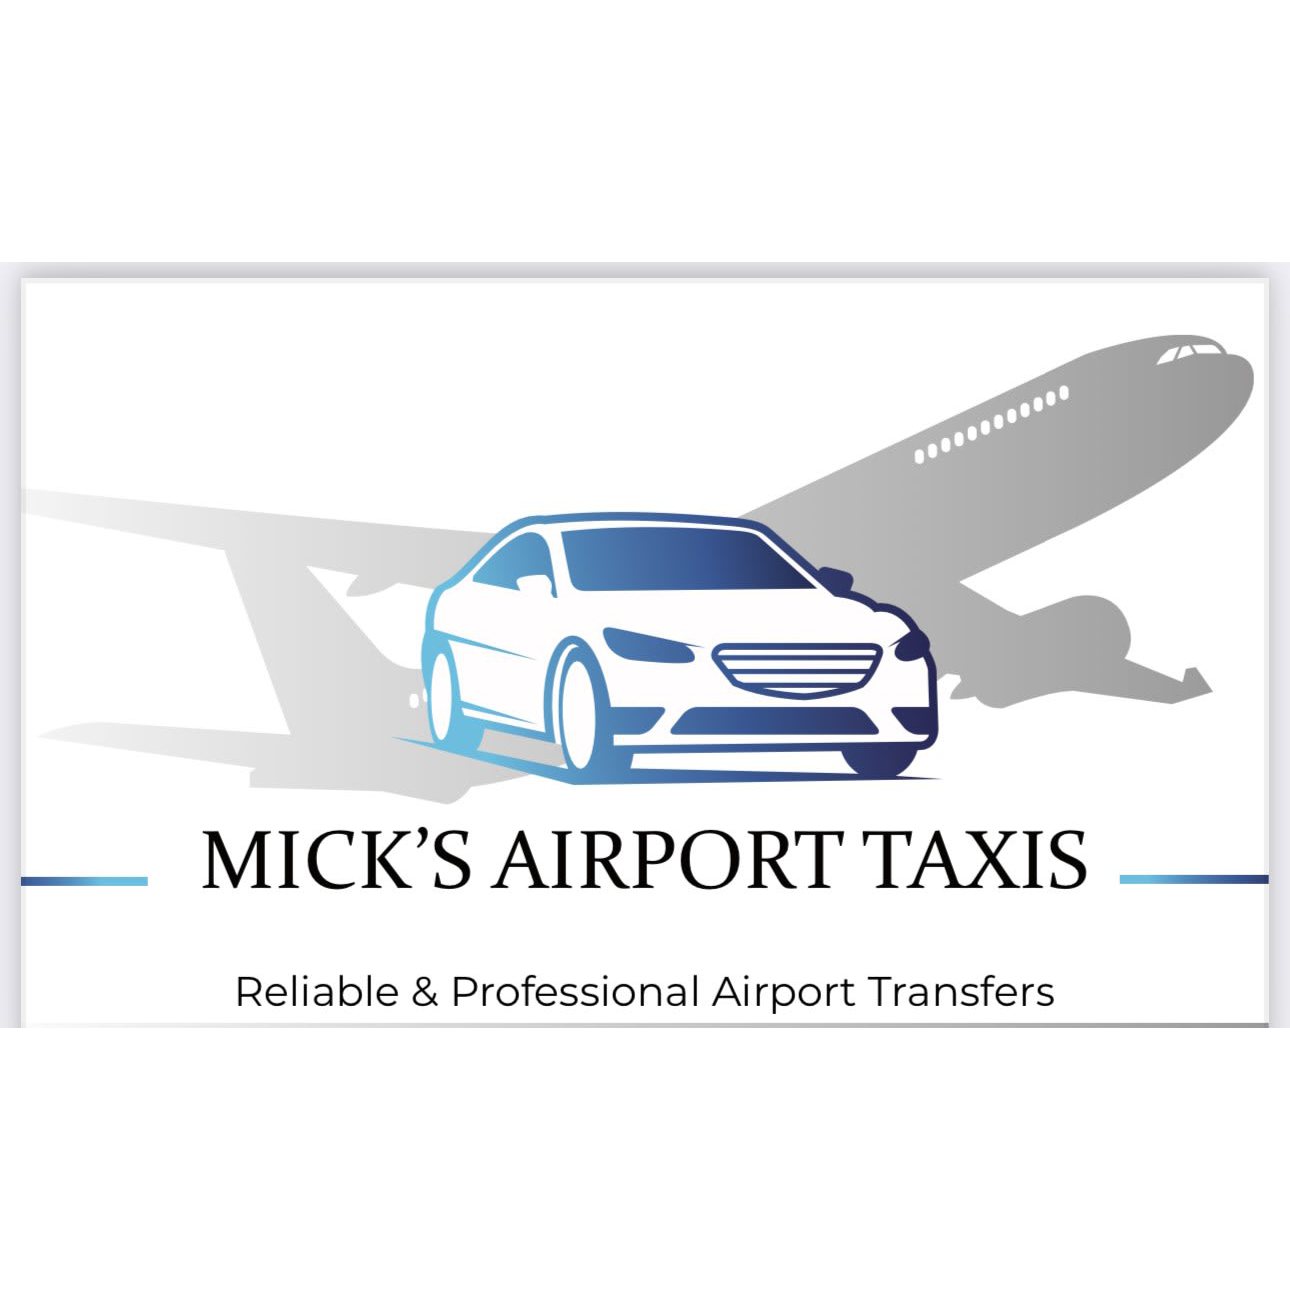 Mick's Airport Taxis Logo